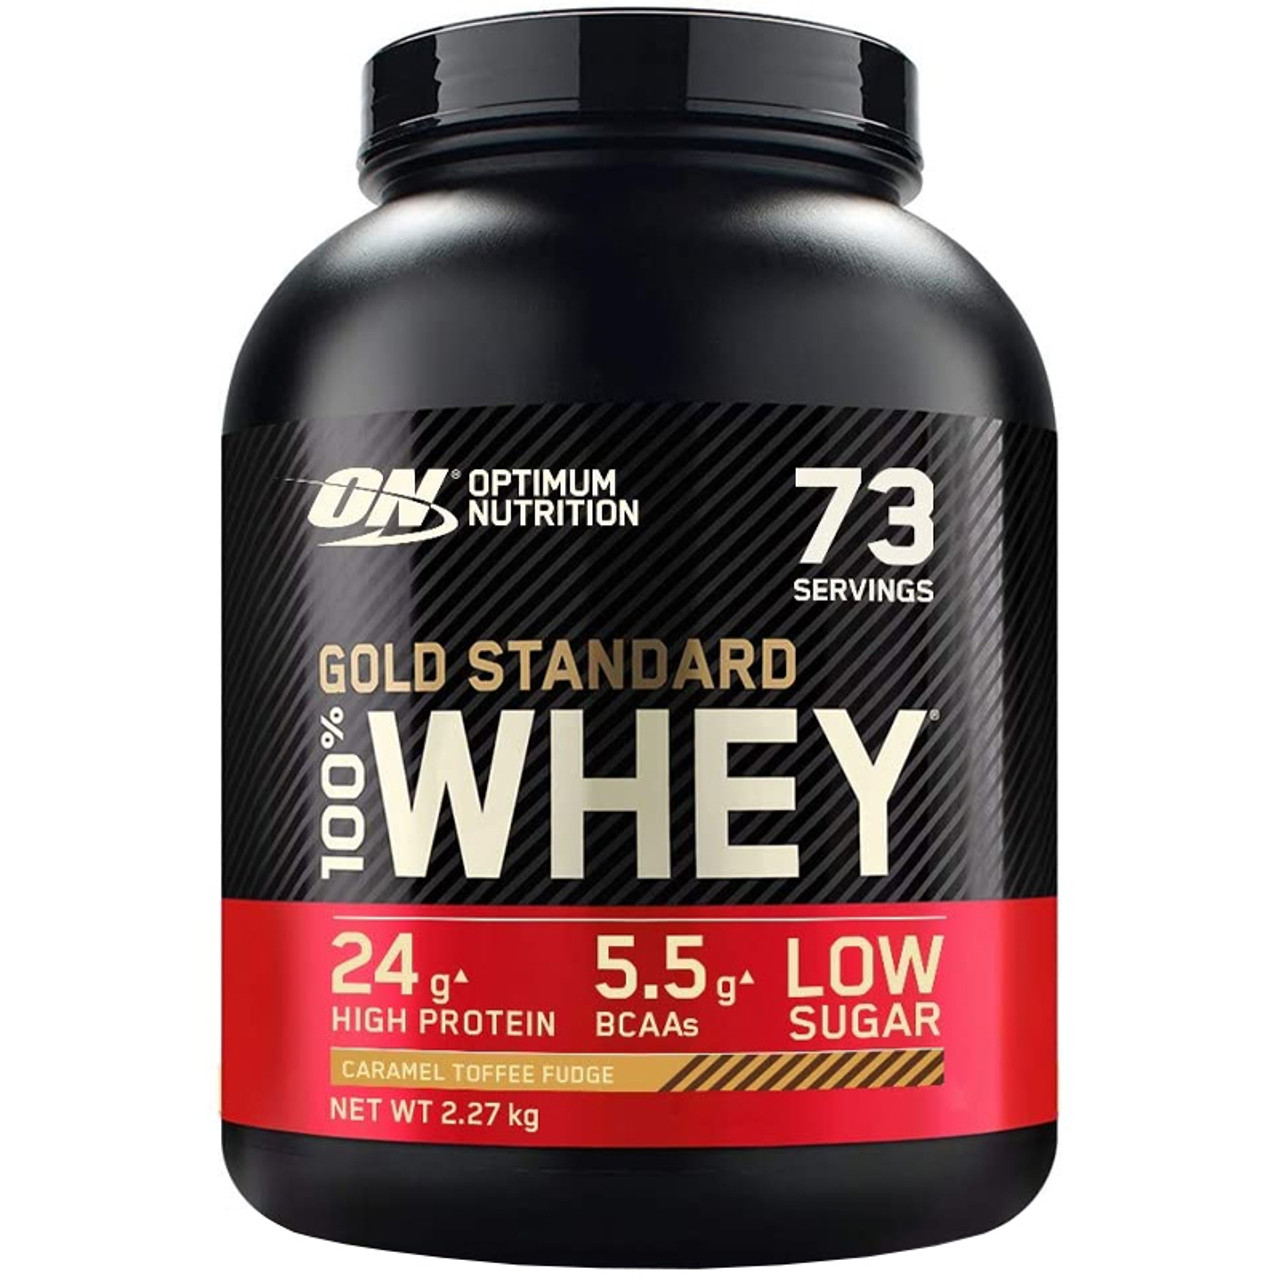 ON WHEY Gold Standard 100% Protein - 2.27kg Caramel Toffe Fudge